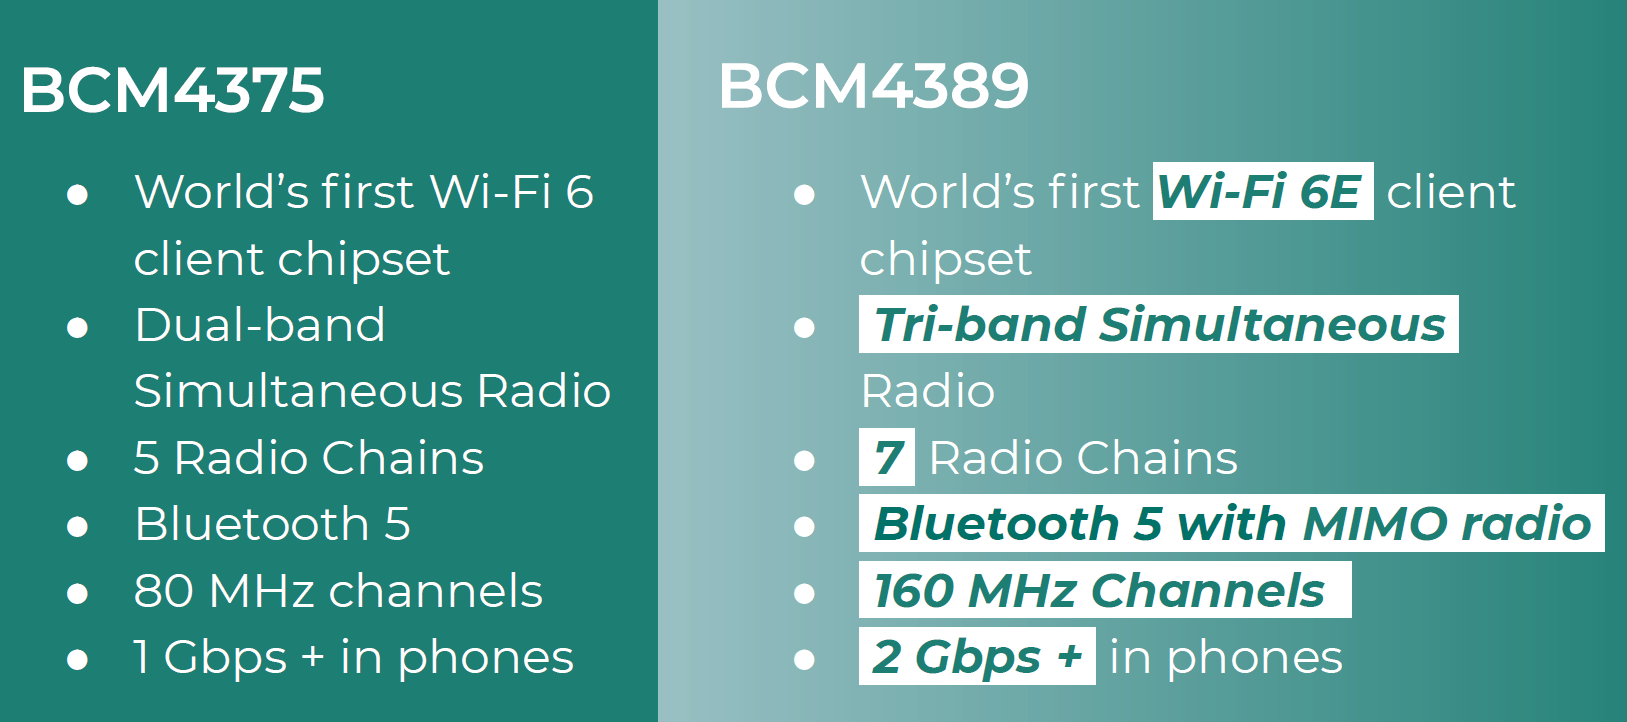 The Wi-Fi 6 on your phone is already out of date, Broadcom announces BCM4389 Wi-Fi 6E client chipset